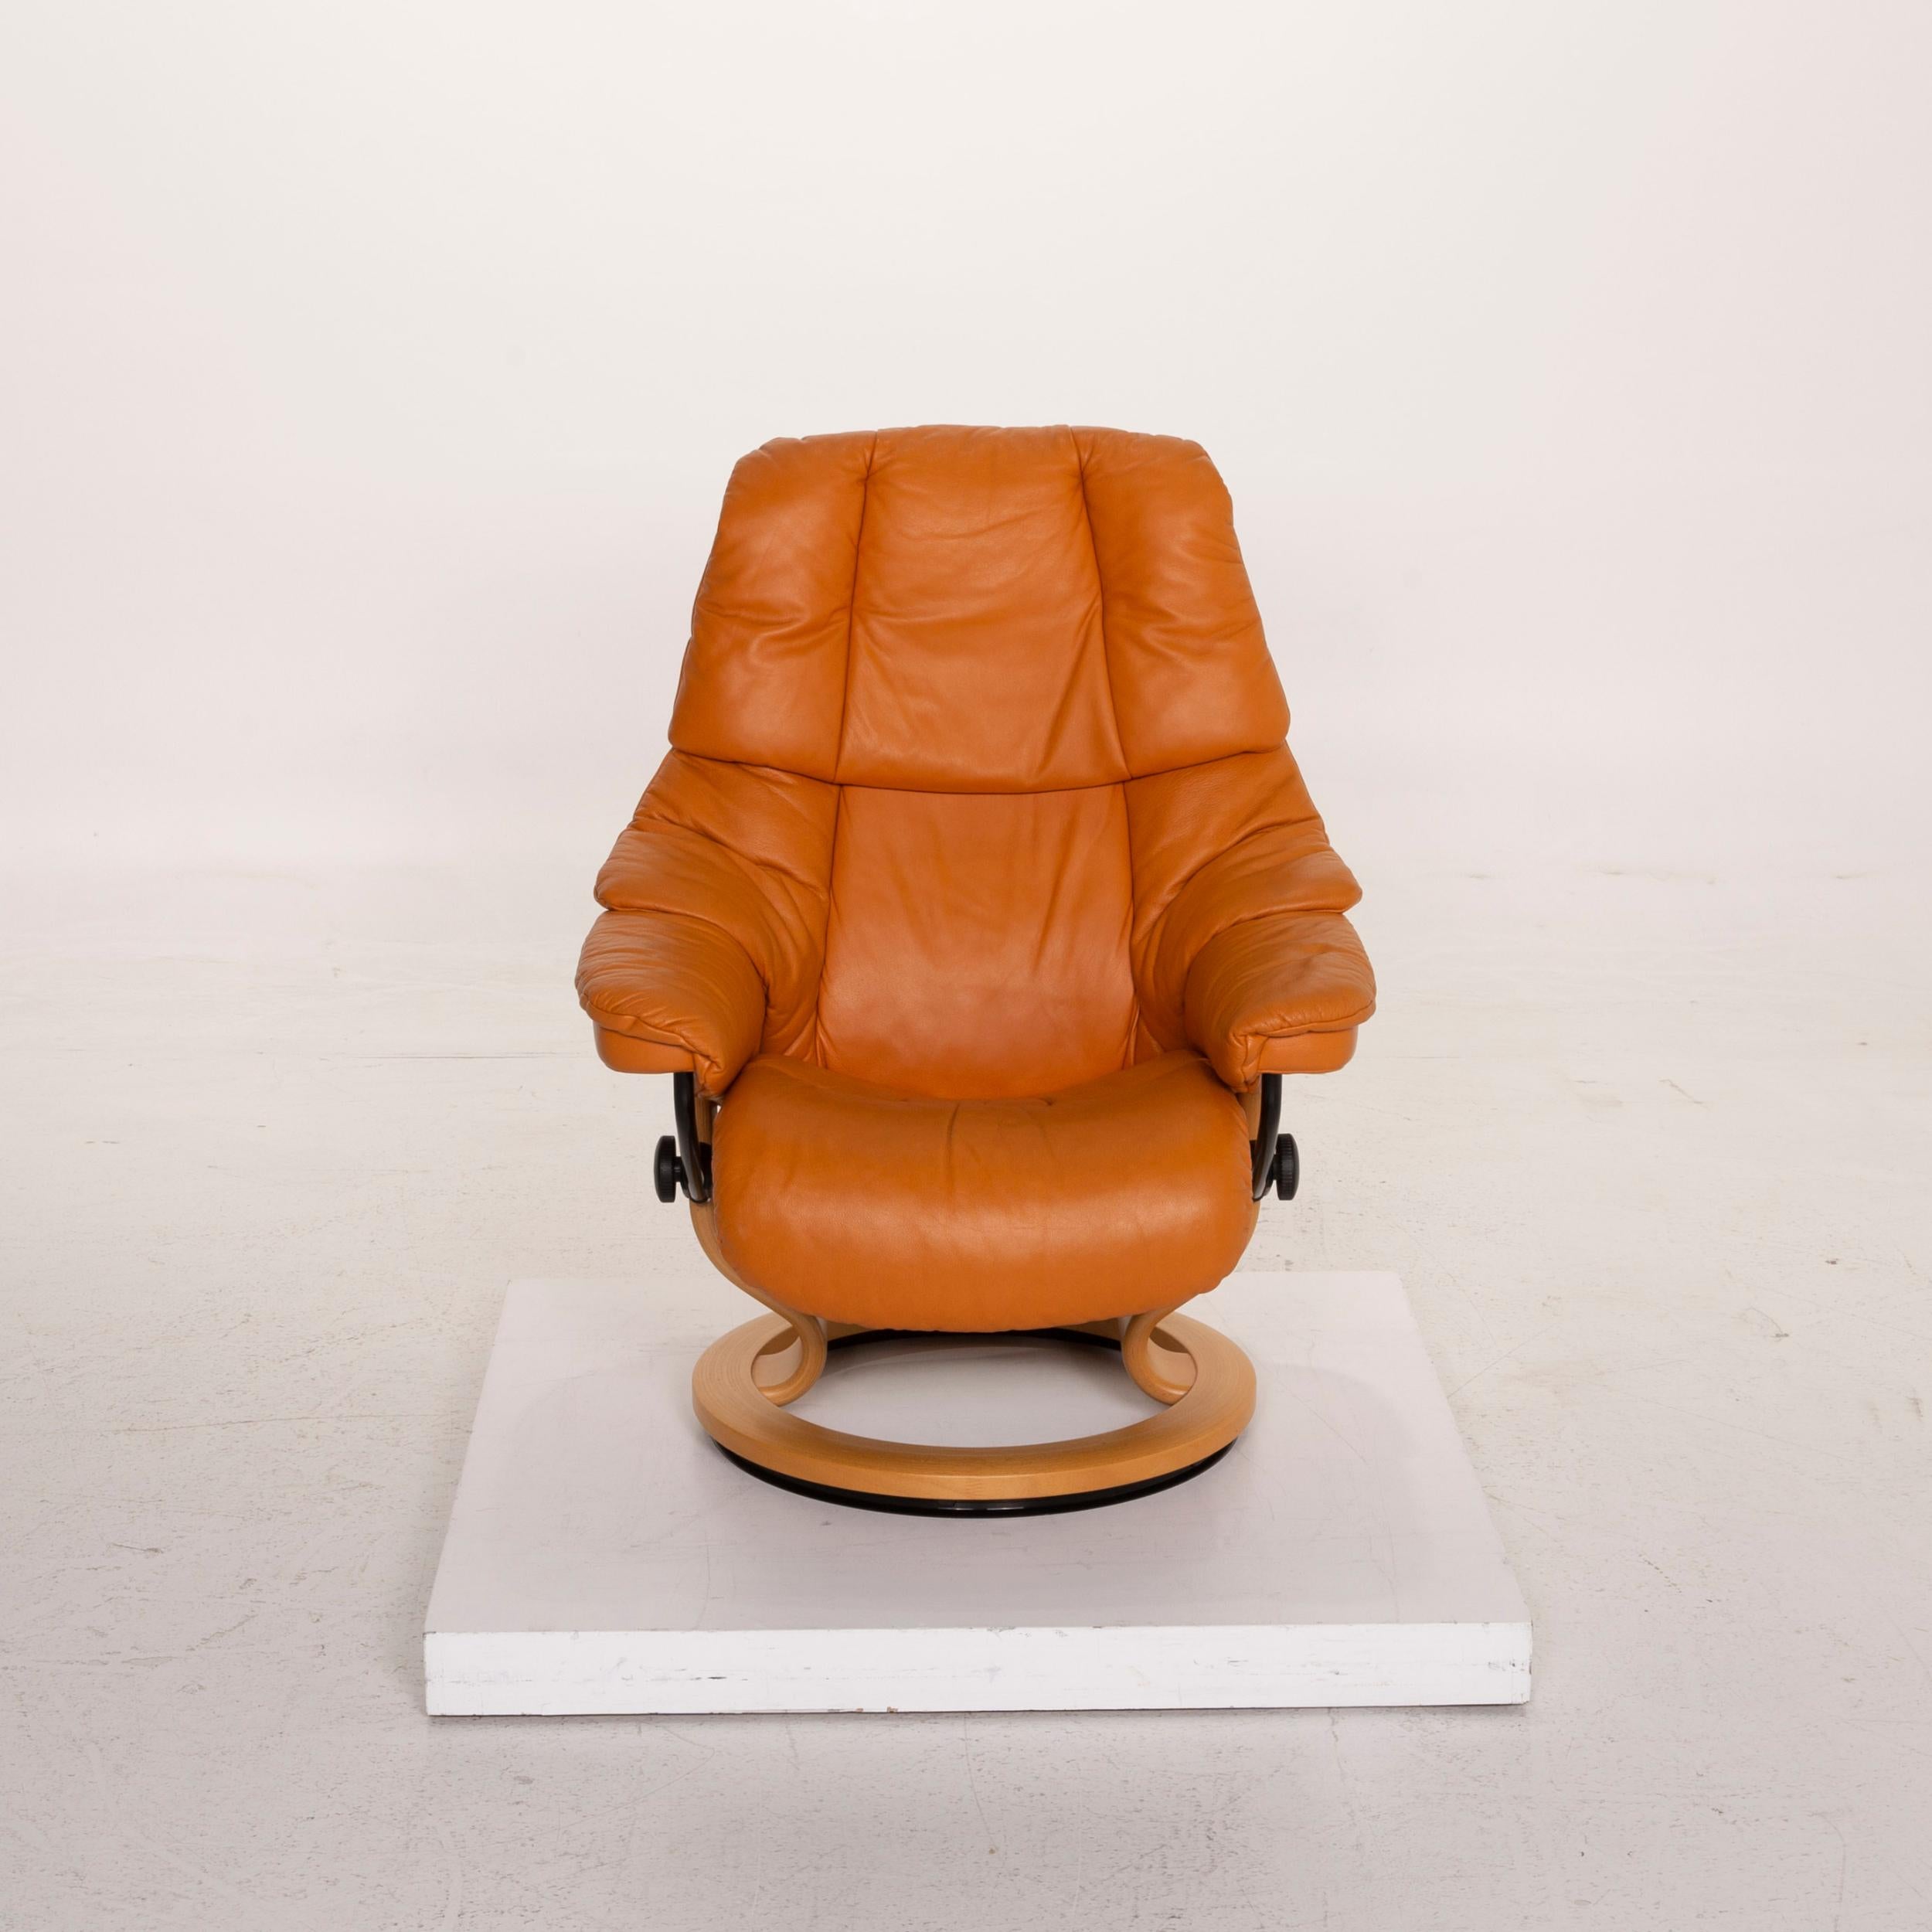 Stressless Reno Leather Armchair Orange Relax Function Incl. Stool 2